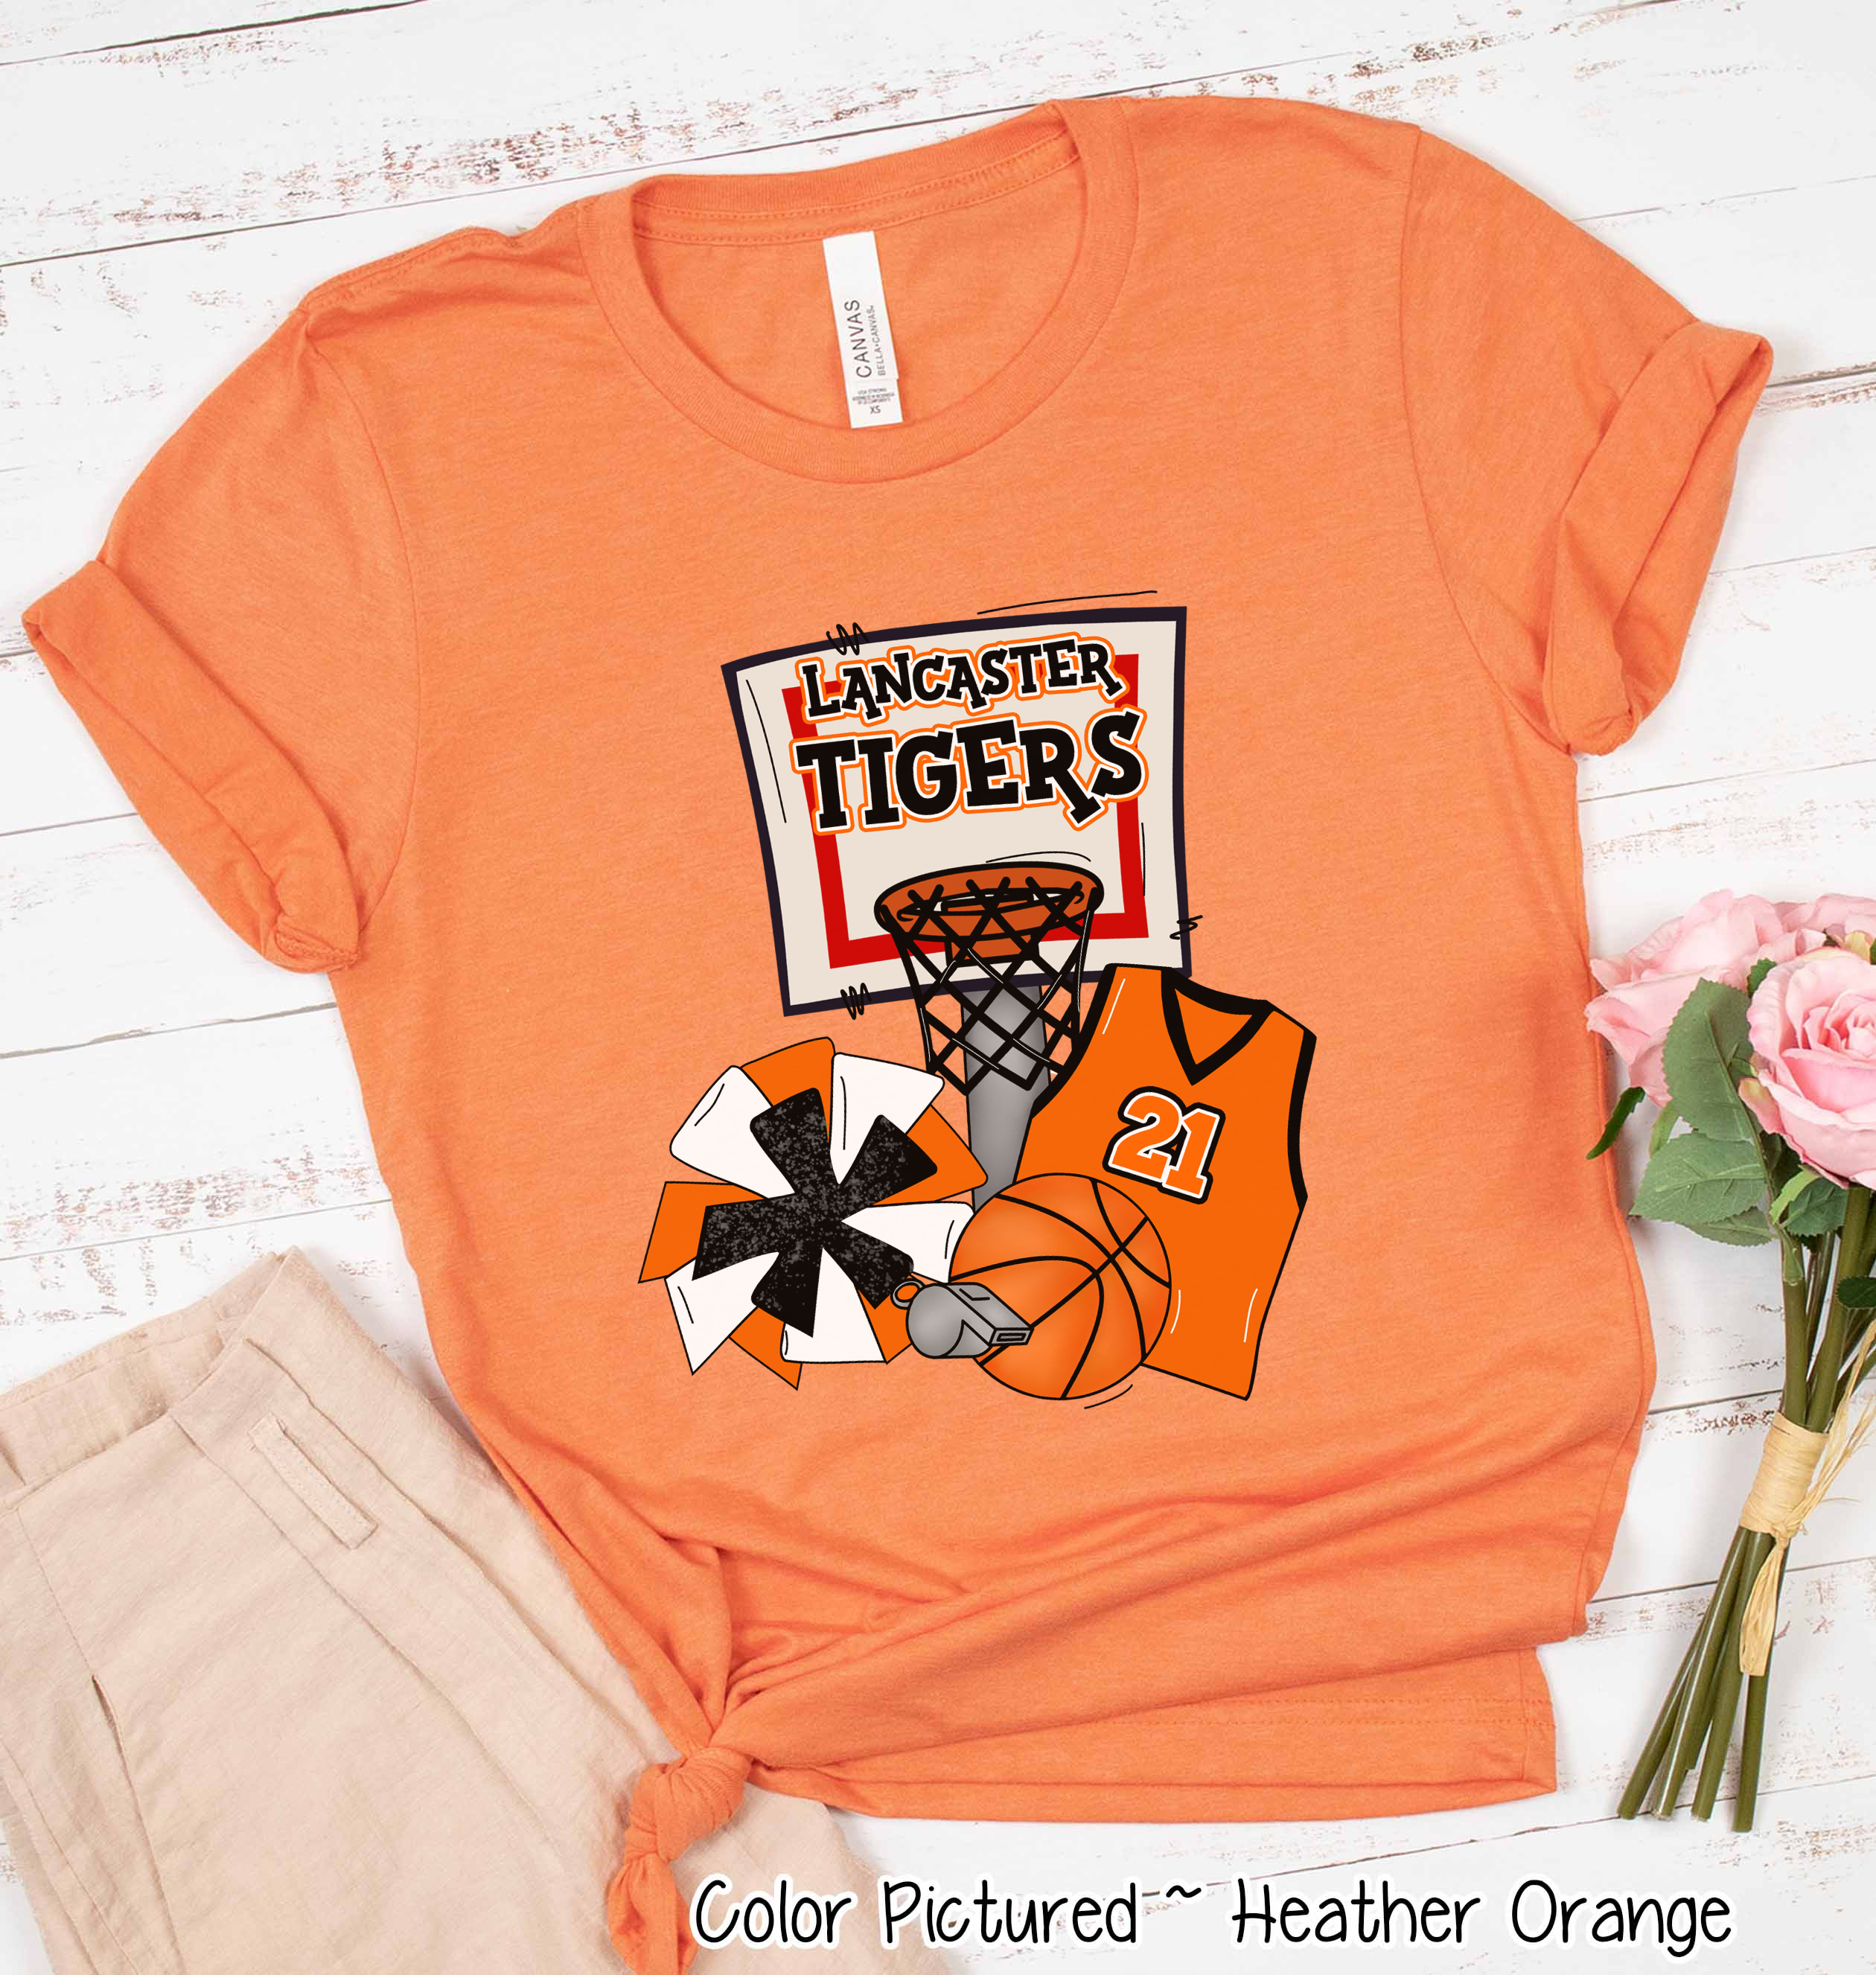 Personalized Basketball Goal and Jersey Fan Tee